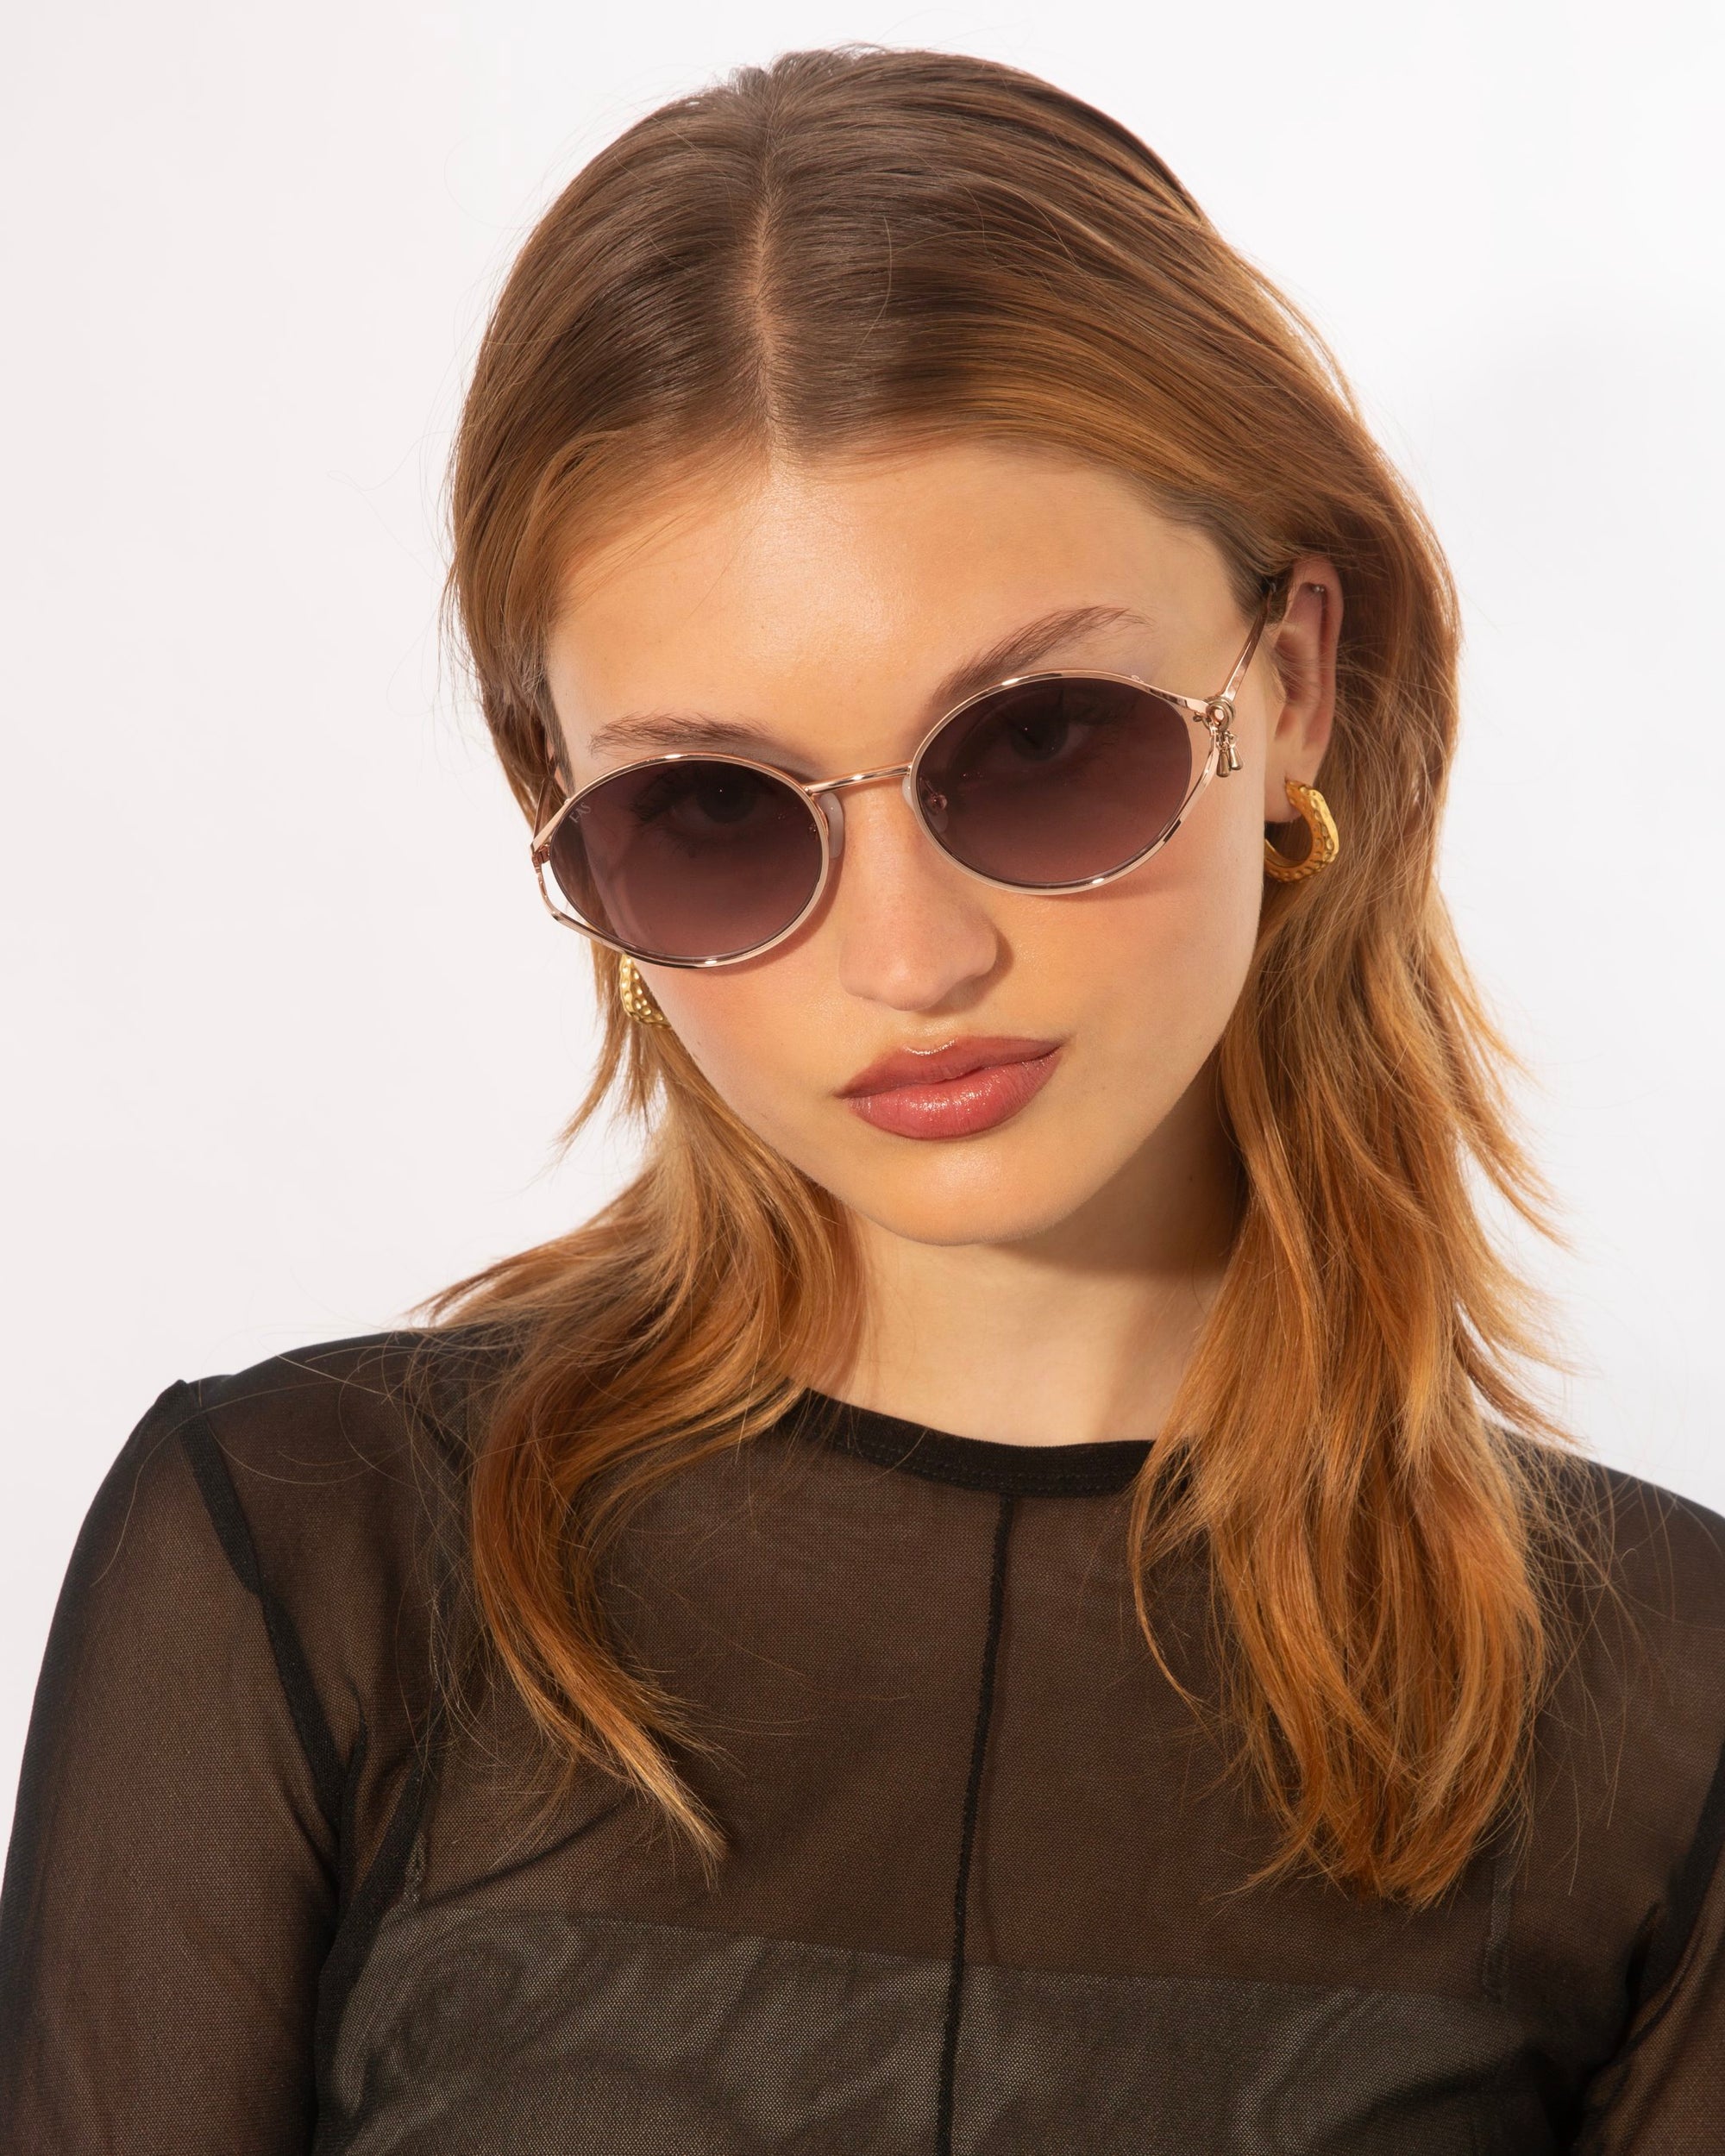 A person with long, light brown hair is wearing round, dark Sky sunglasses by For Art&#39;s Sake® with jade-stone nose pads and gold hoop earrings. They have a neutral expression and are dressed in a sheer black top, posing against a plain white background.